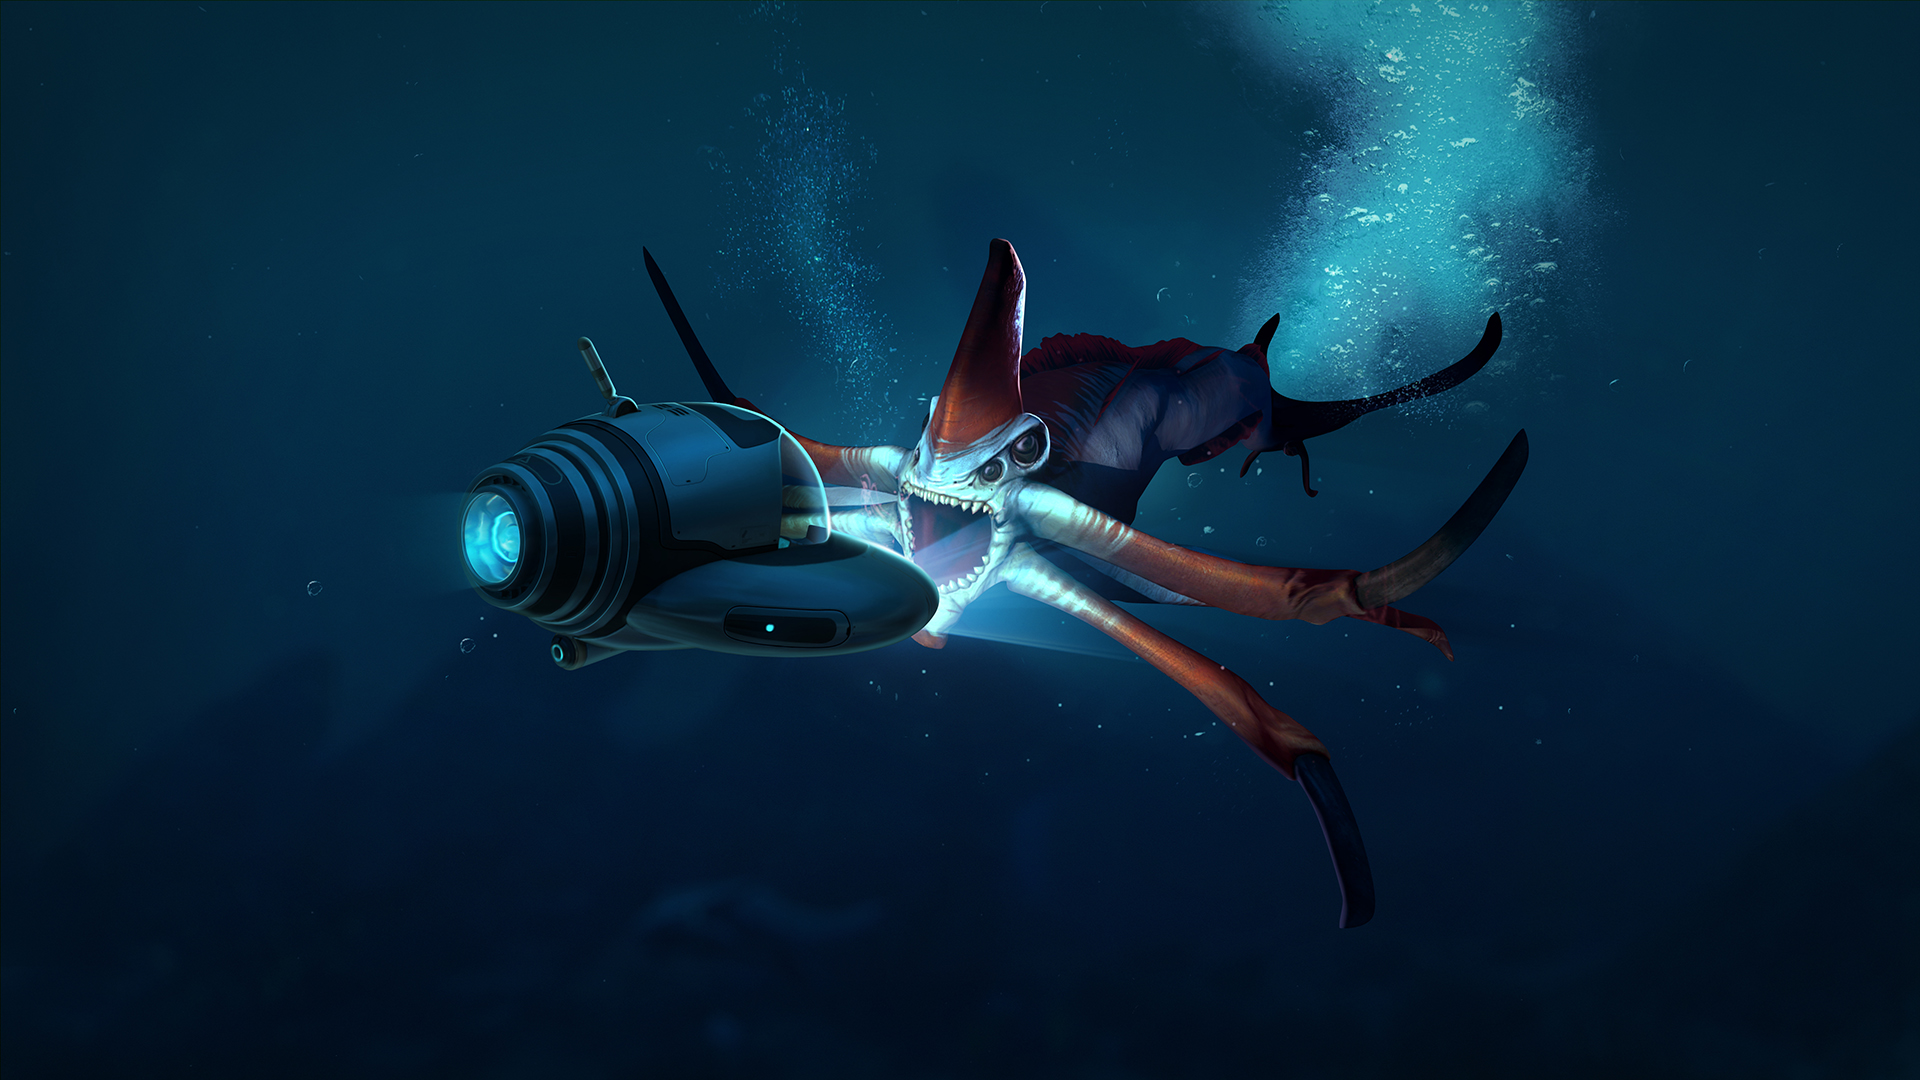 Subnautica monsters in the deep